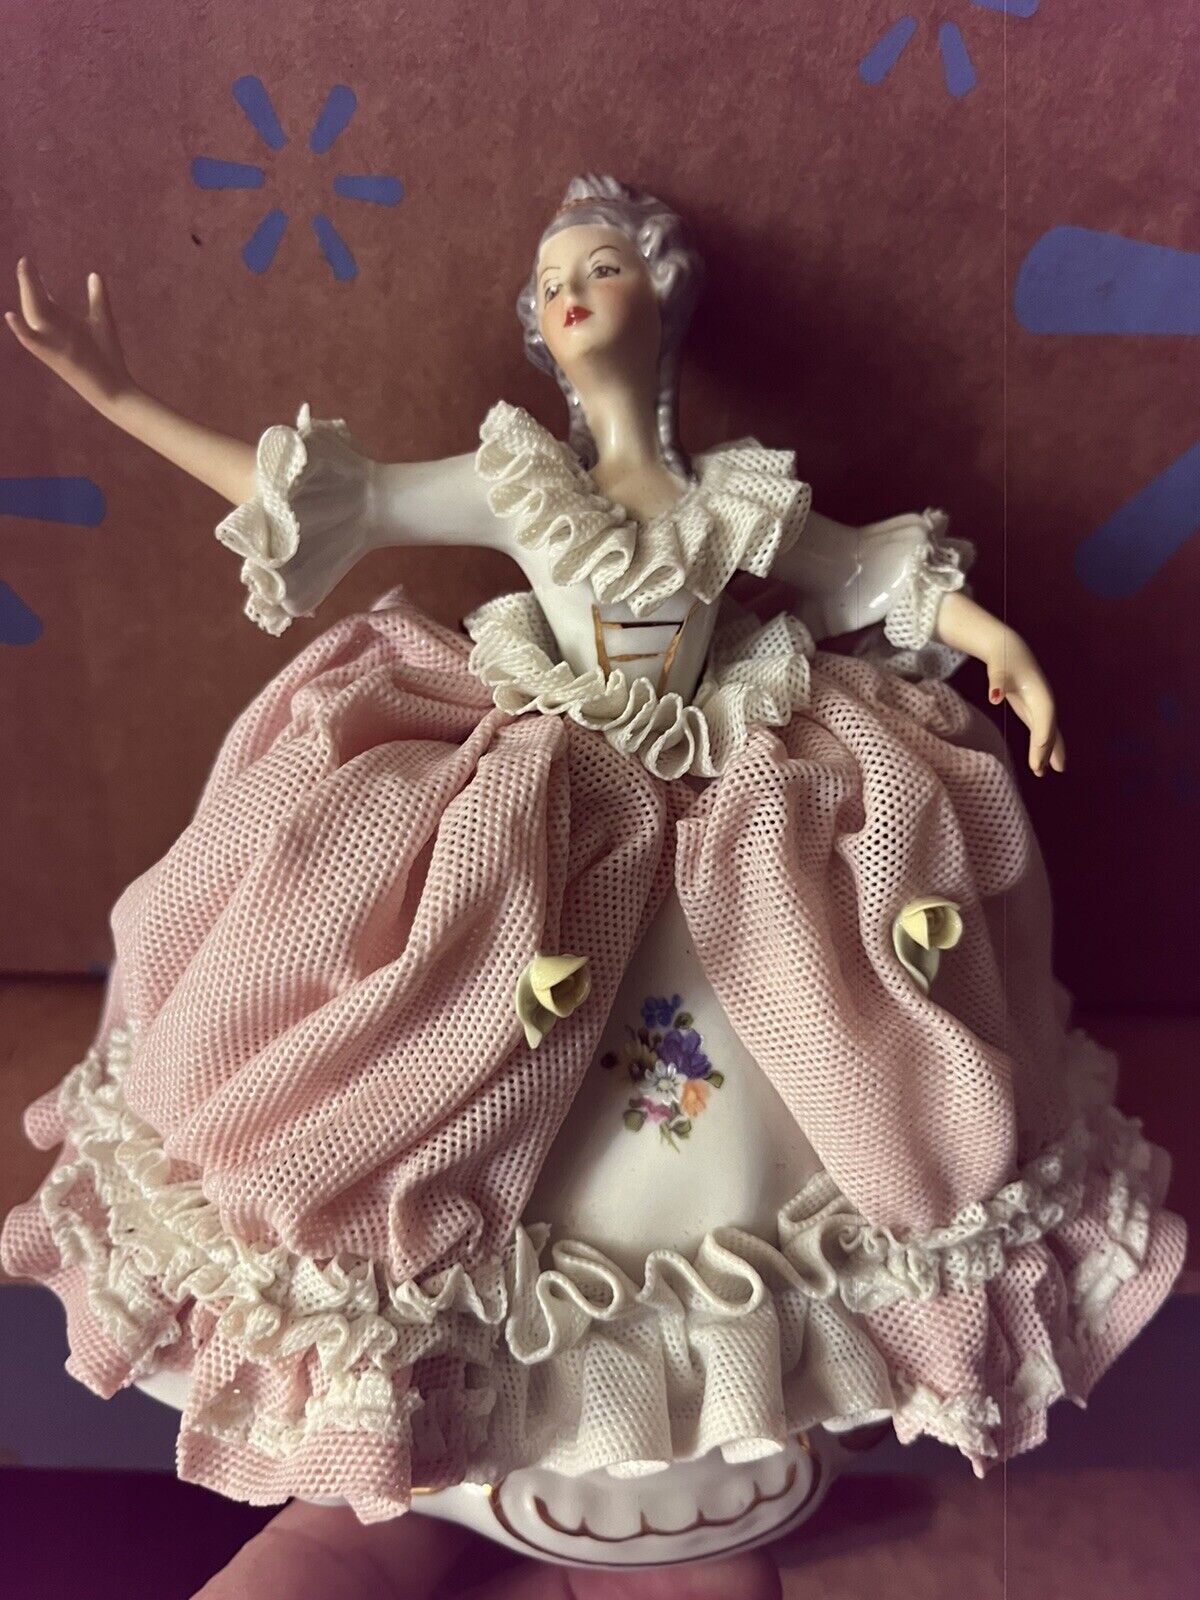 Vintage Dresden Porcelain Lace Figurine - Lady Sitting In Chair